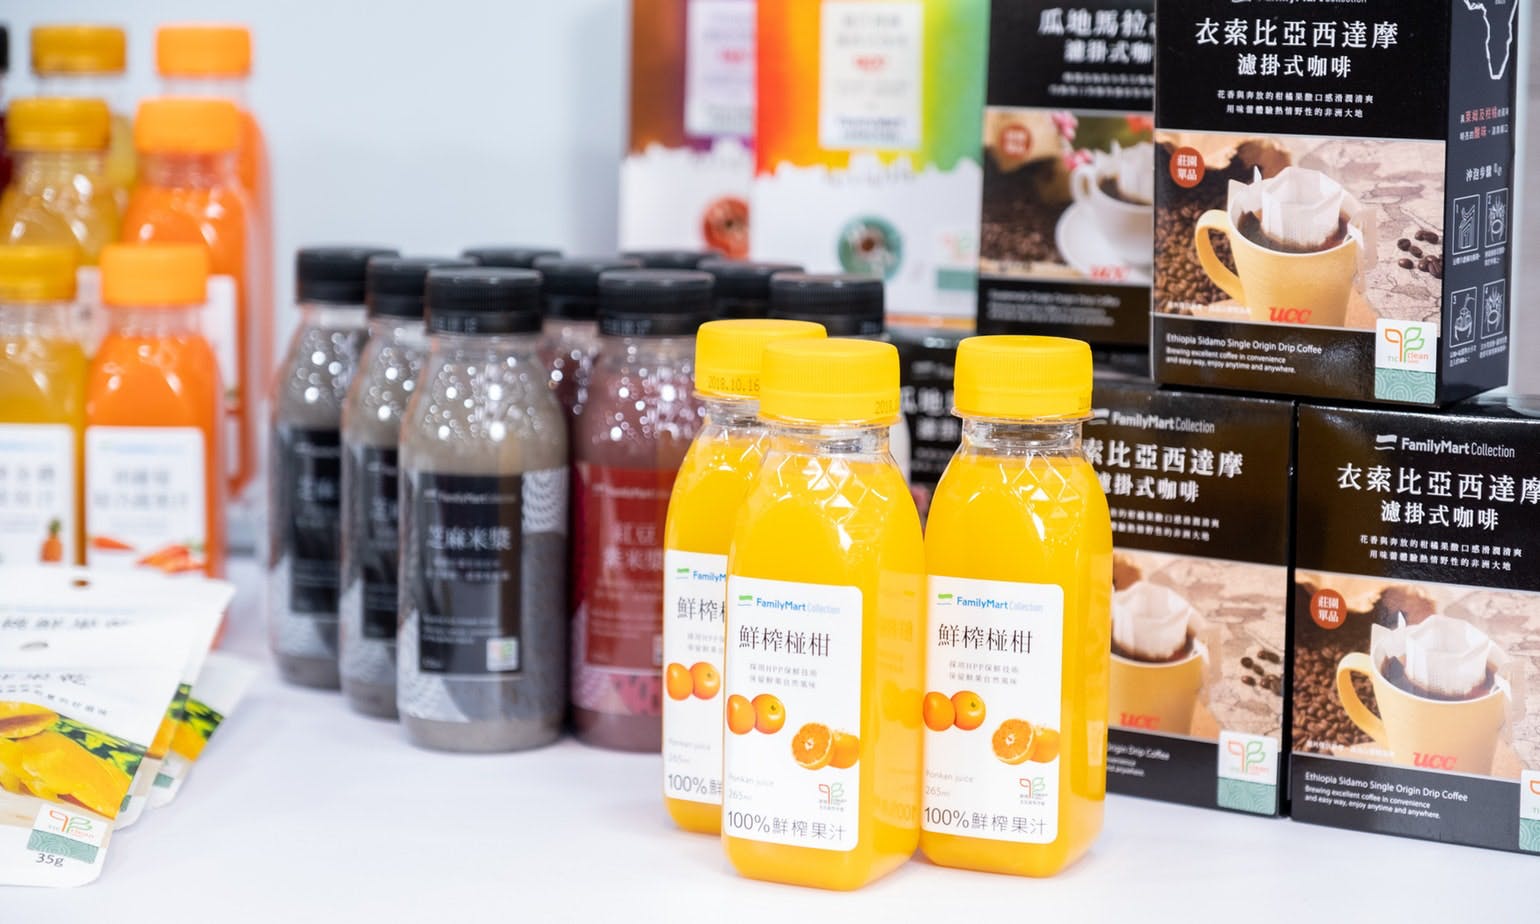 Taiwanese Companies Banish Food Additives in Quest for Natural Flavor